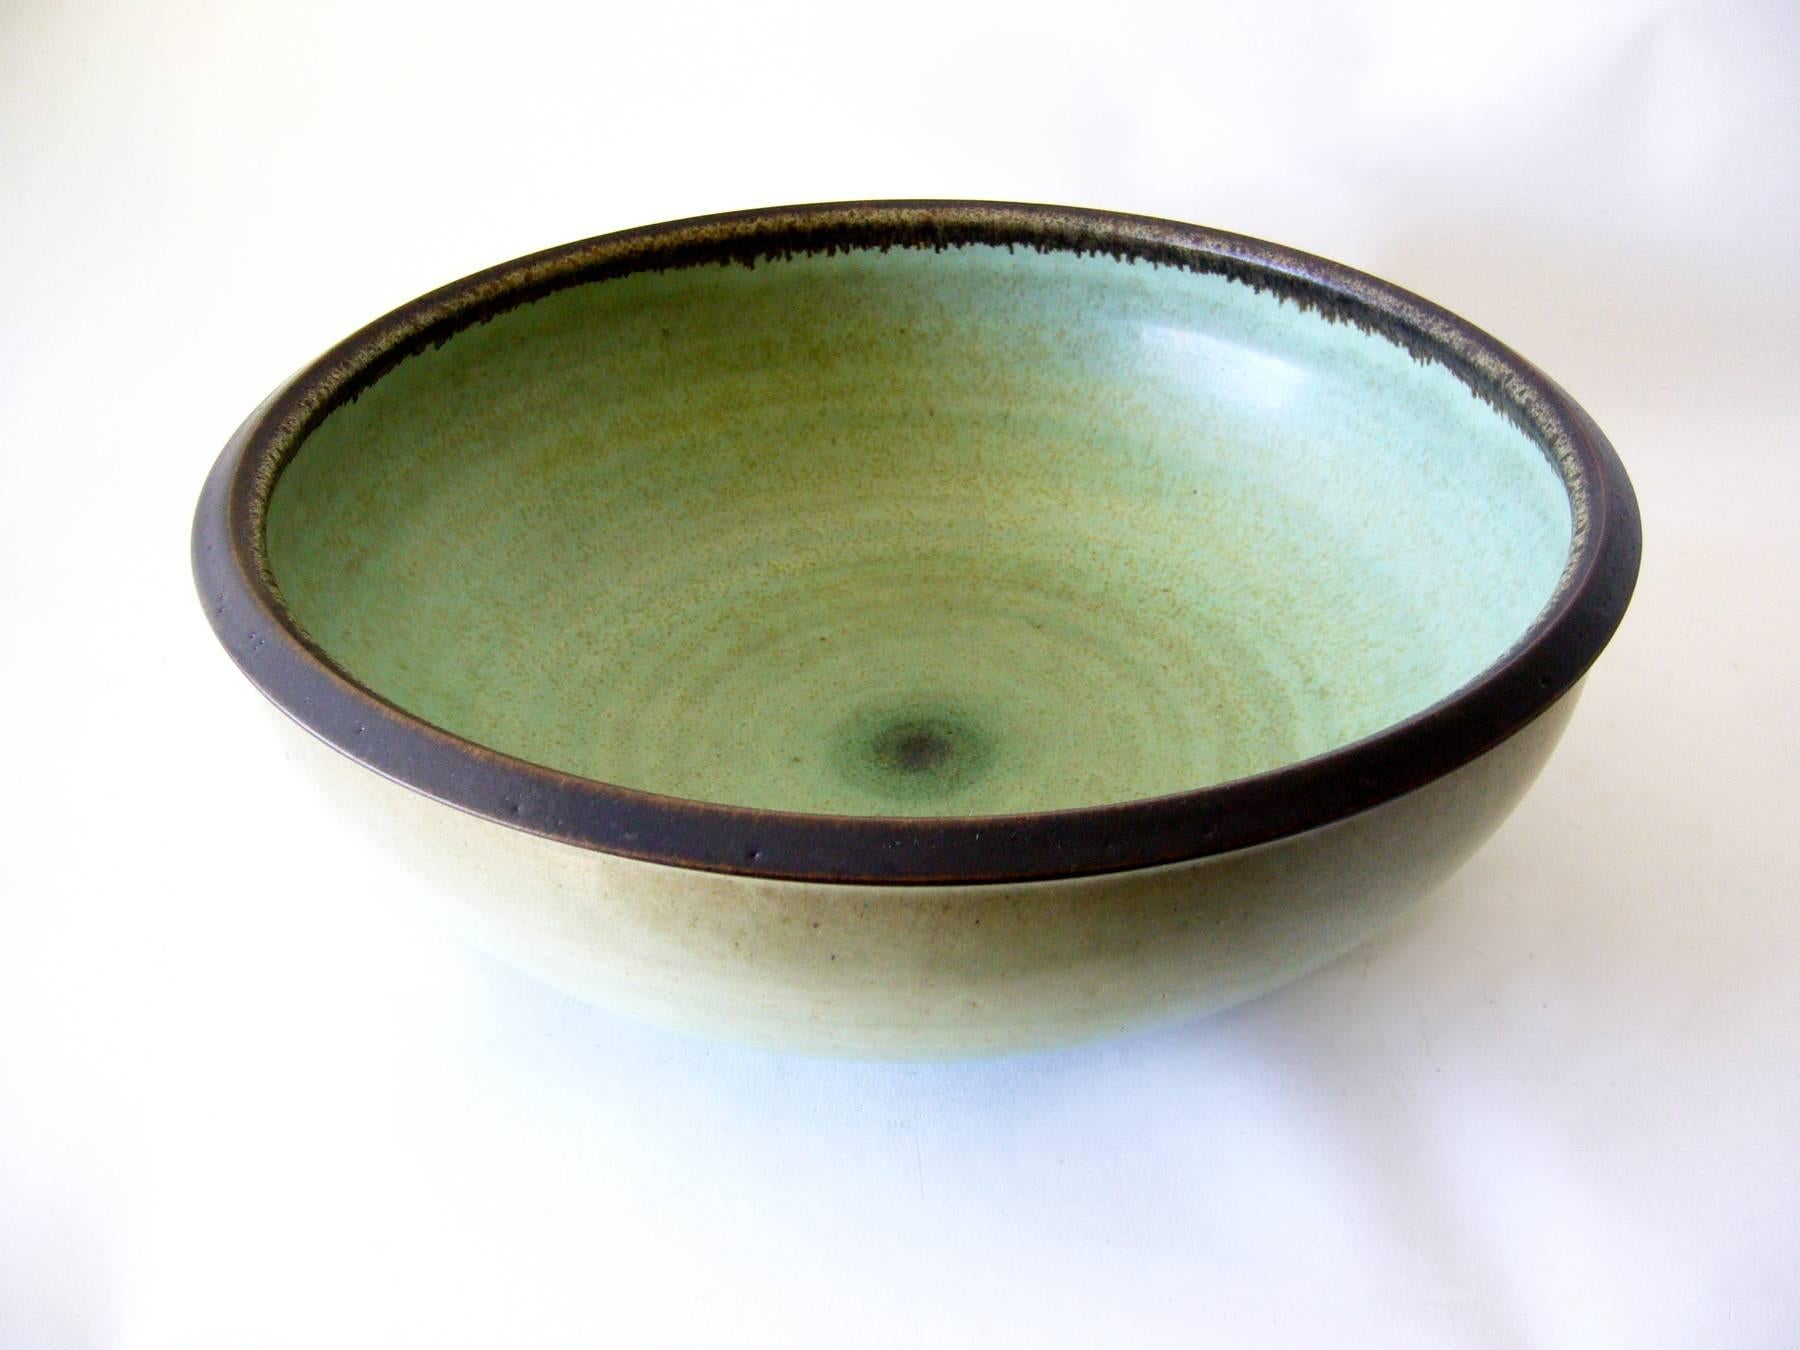 Large celedon glazed open stoneware bowl created by master ceramist Harrison McIntosh of Claremont, California. Great color combination of variations in celadon green on the interior, low lighted with a dark brown matte glazed rim. Piece measures